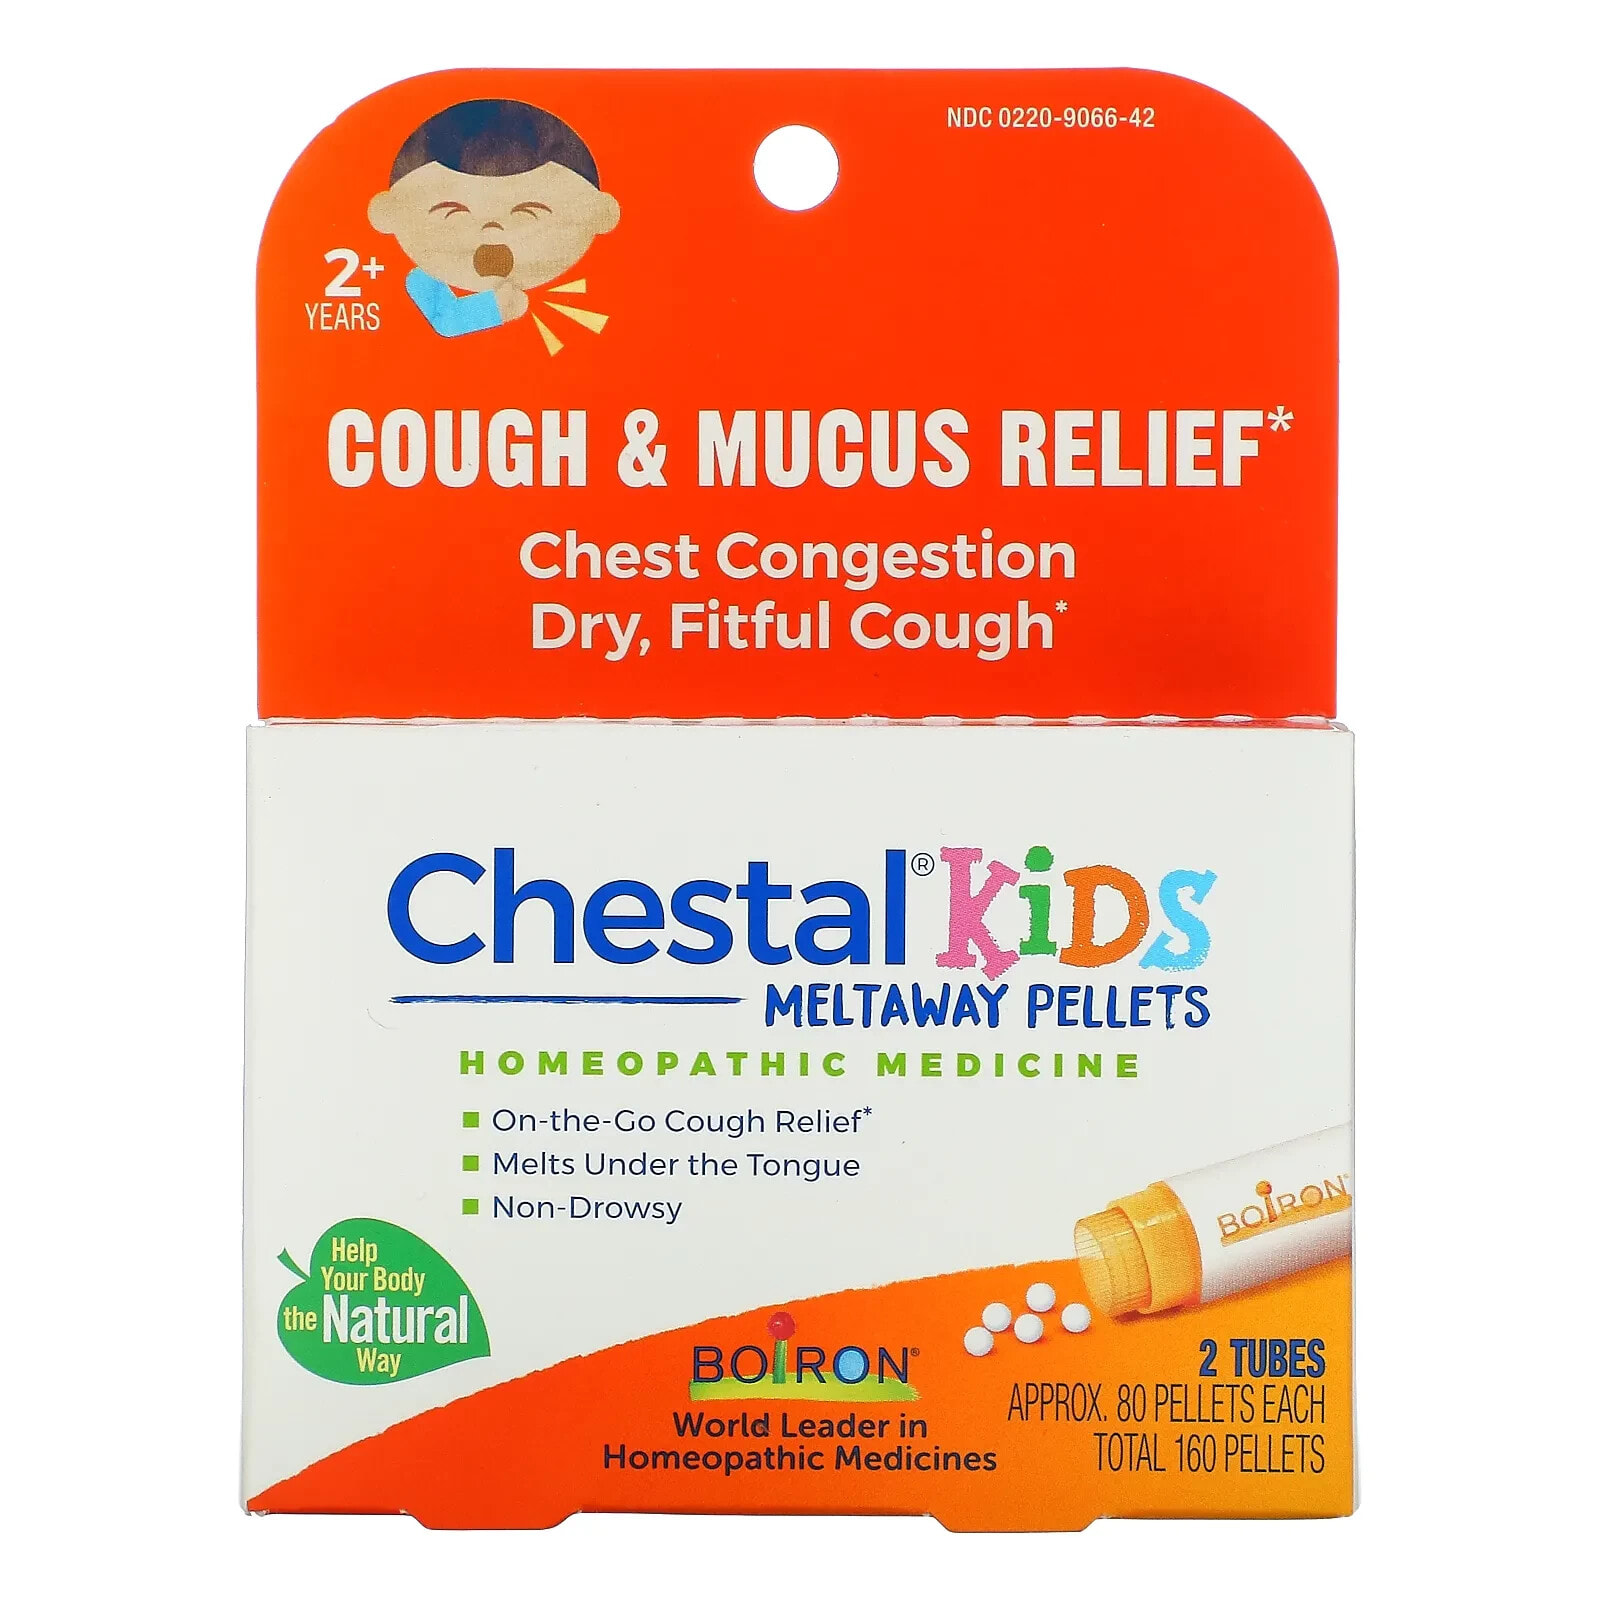 Kids, Chestal Meltaway Pellets, Cough & Mucus Relief, 4+ Years, 2 Tubes, Approx. 80 Pellets Each